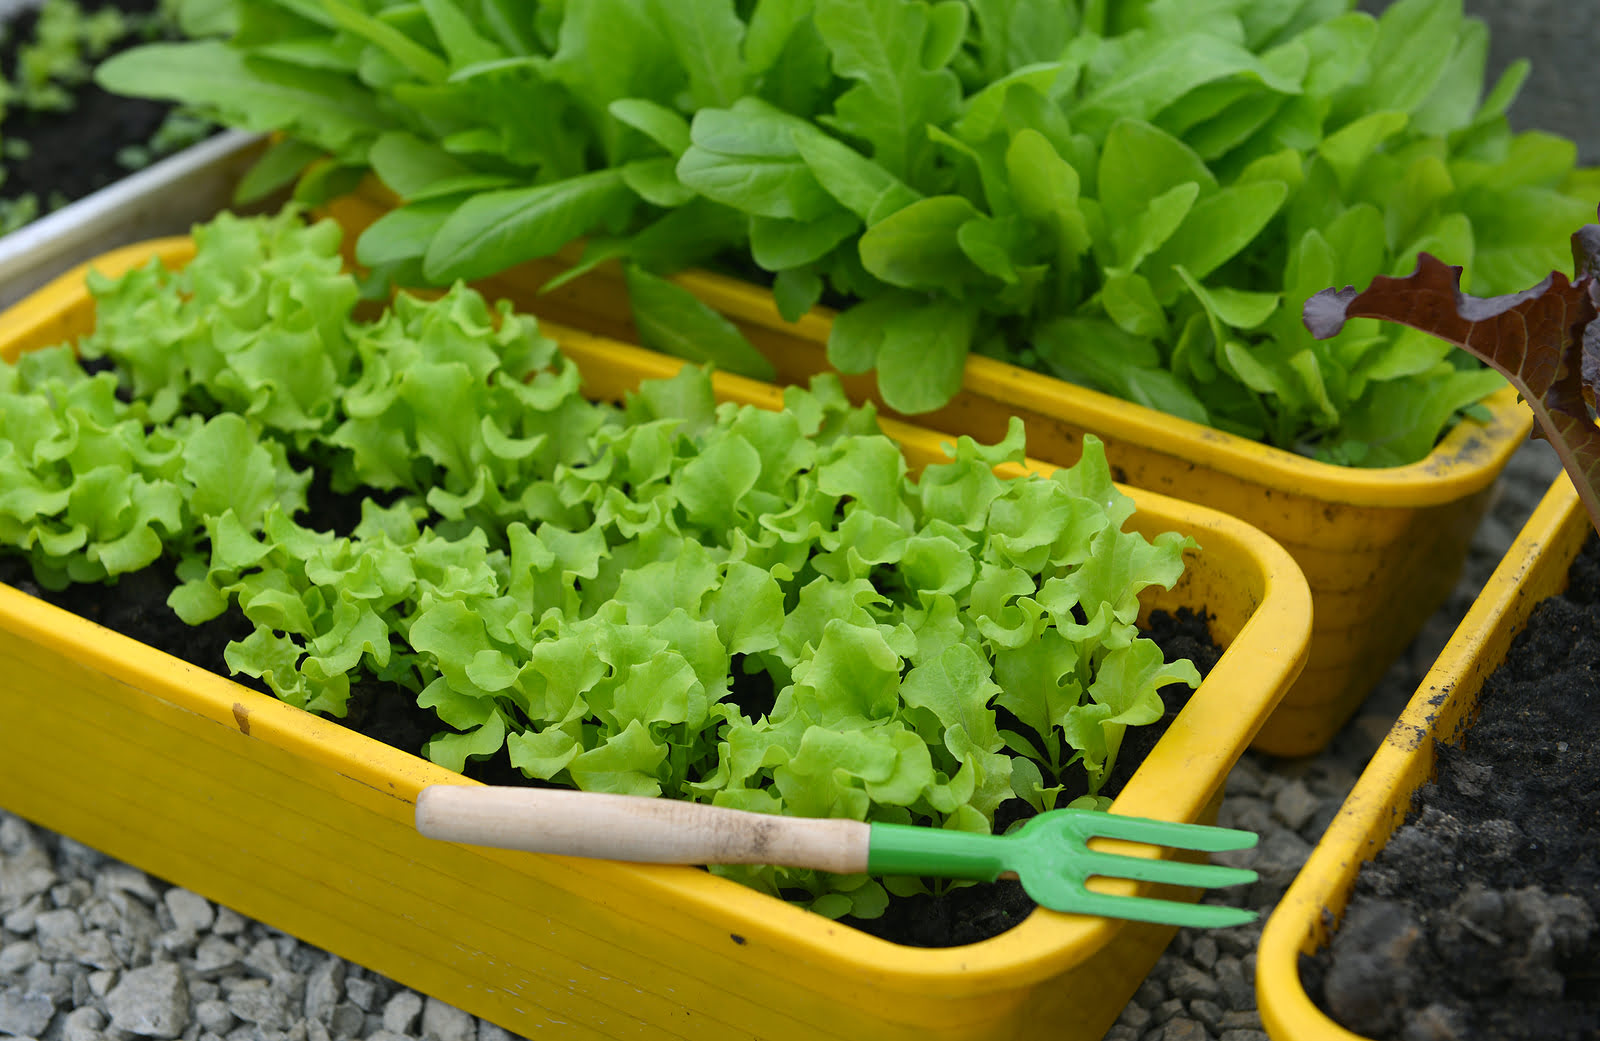 How To Plant Lettuce From Seed